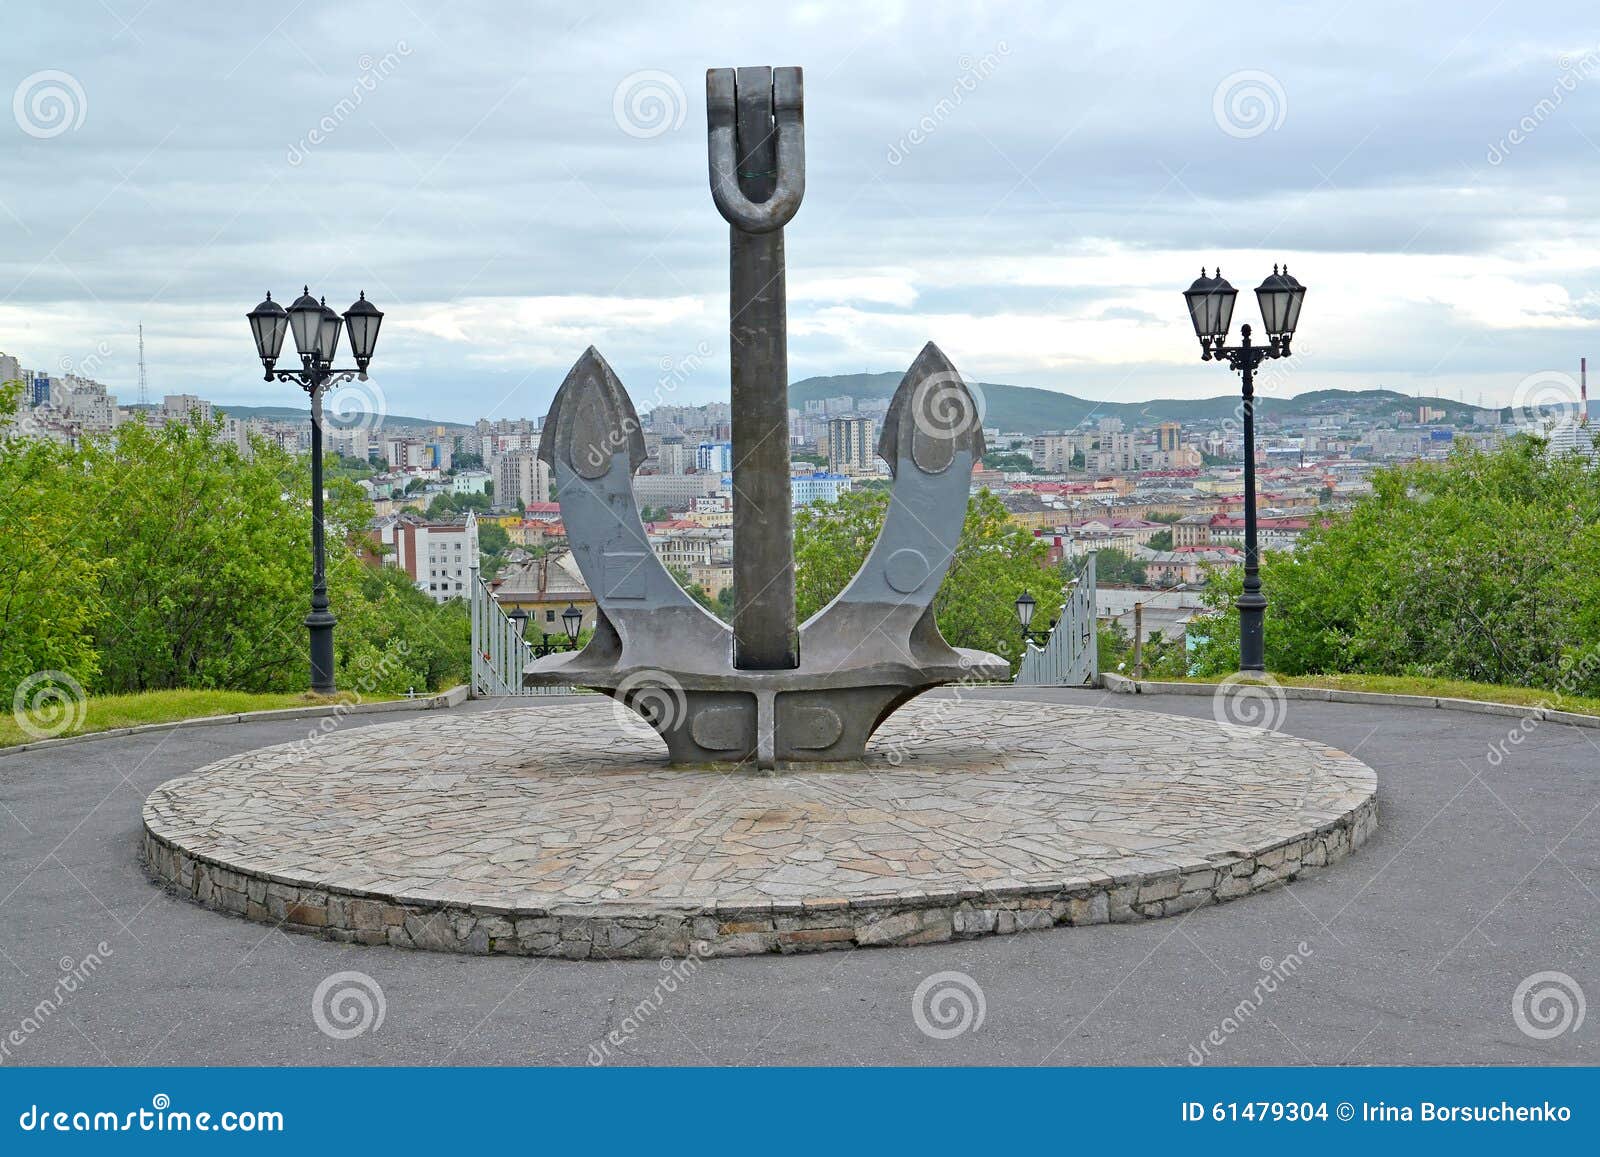 ship anchor, part of a memorial in memory of the seamen who were lost in a peace time. murmansk